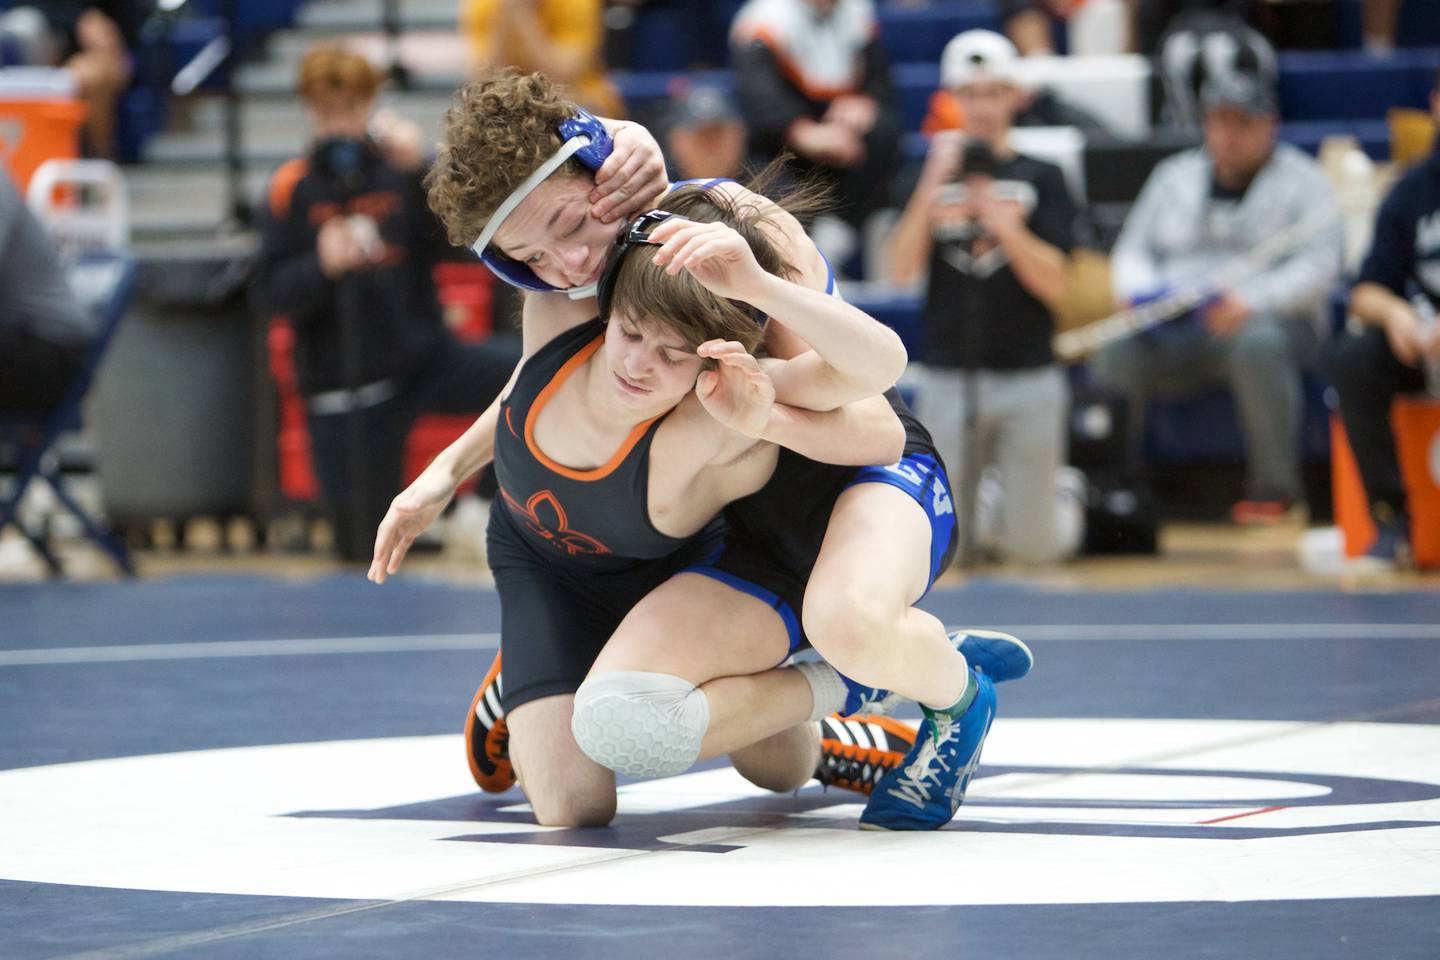 St. Charles East's Dom Munaretto and Geneva's Joey Sikorsky compete in the 106 lb. Finals at the DuKane Wrestling Conference meet at Lake Park High School on Saturday, Jan.21,2023 in Roselle.